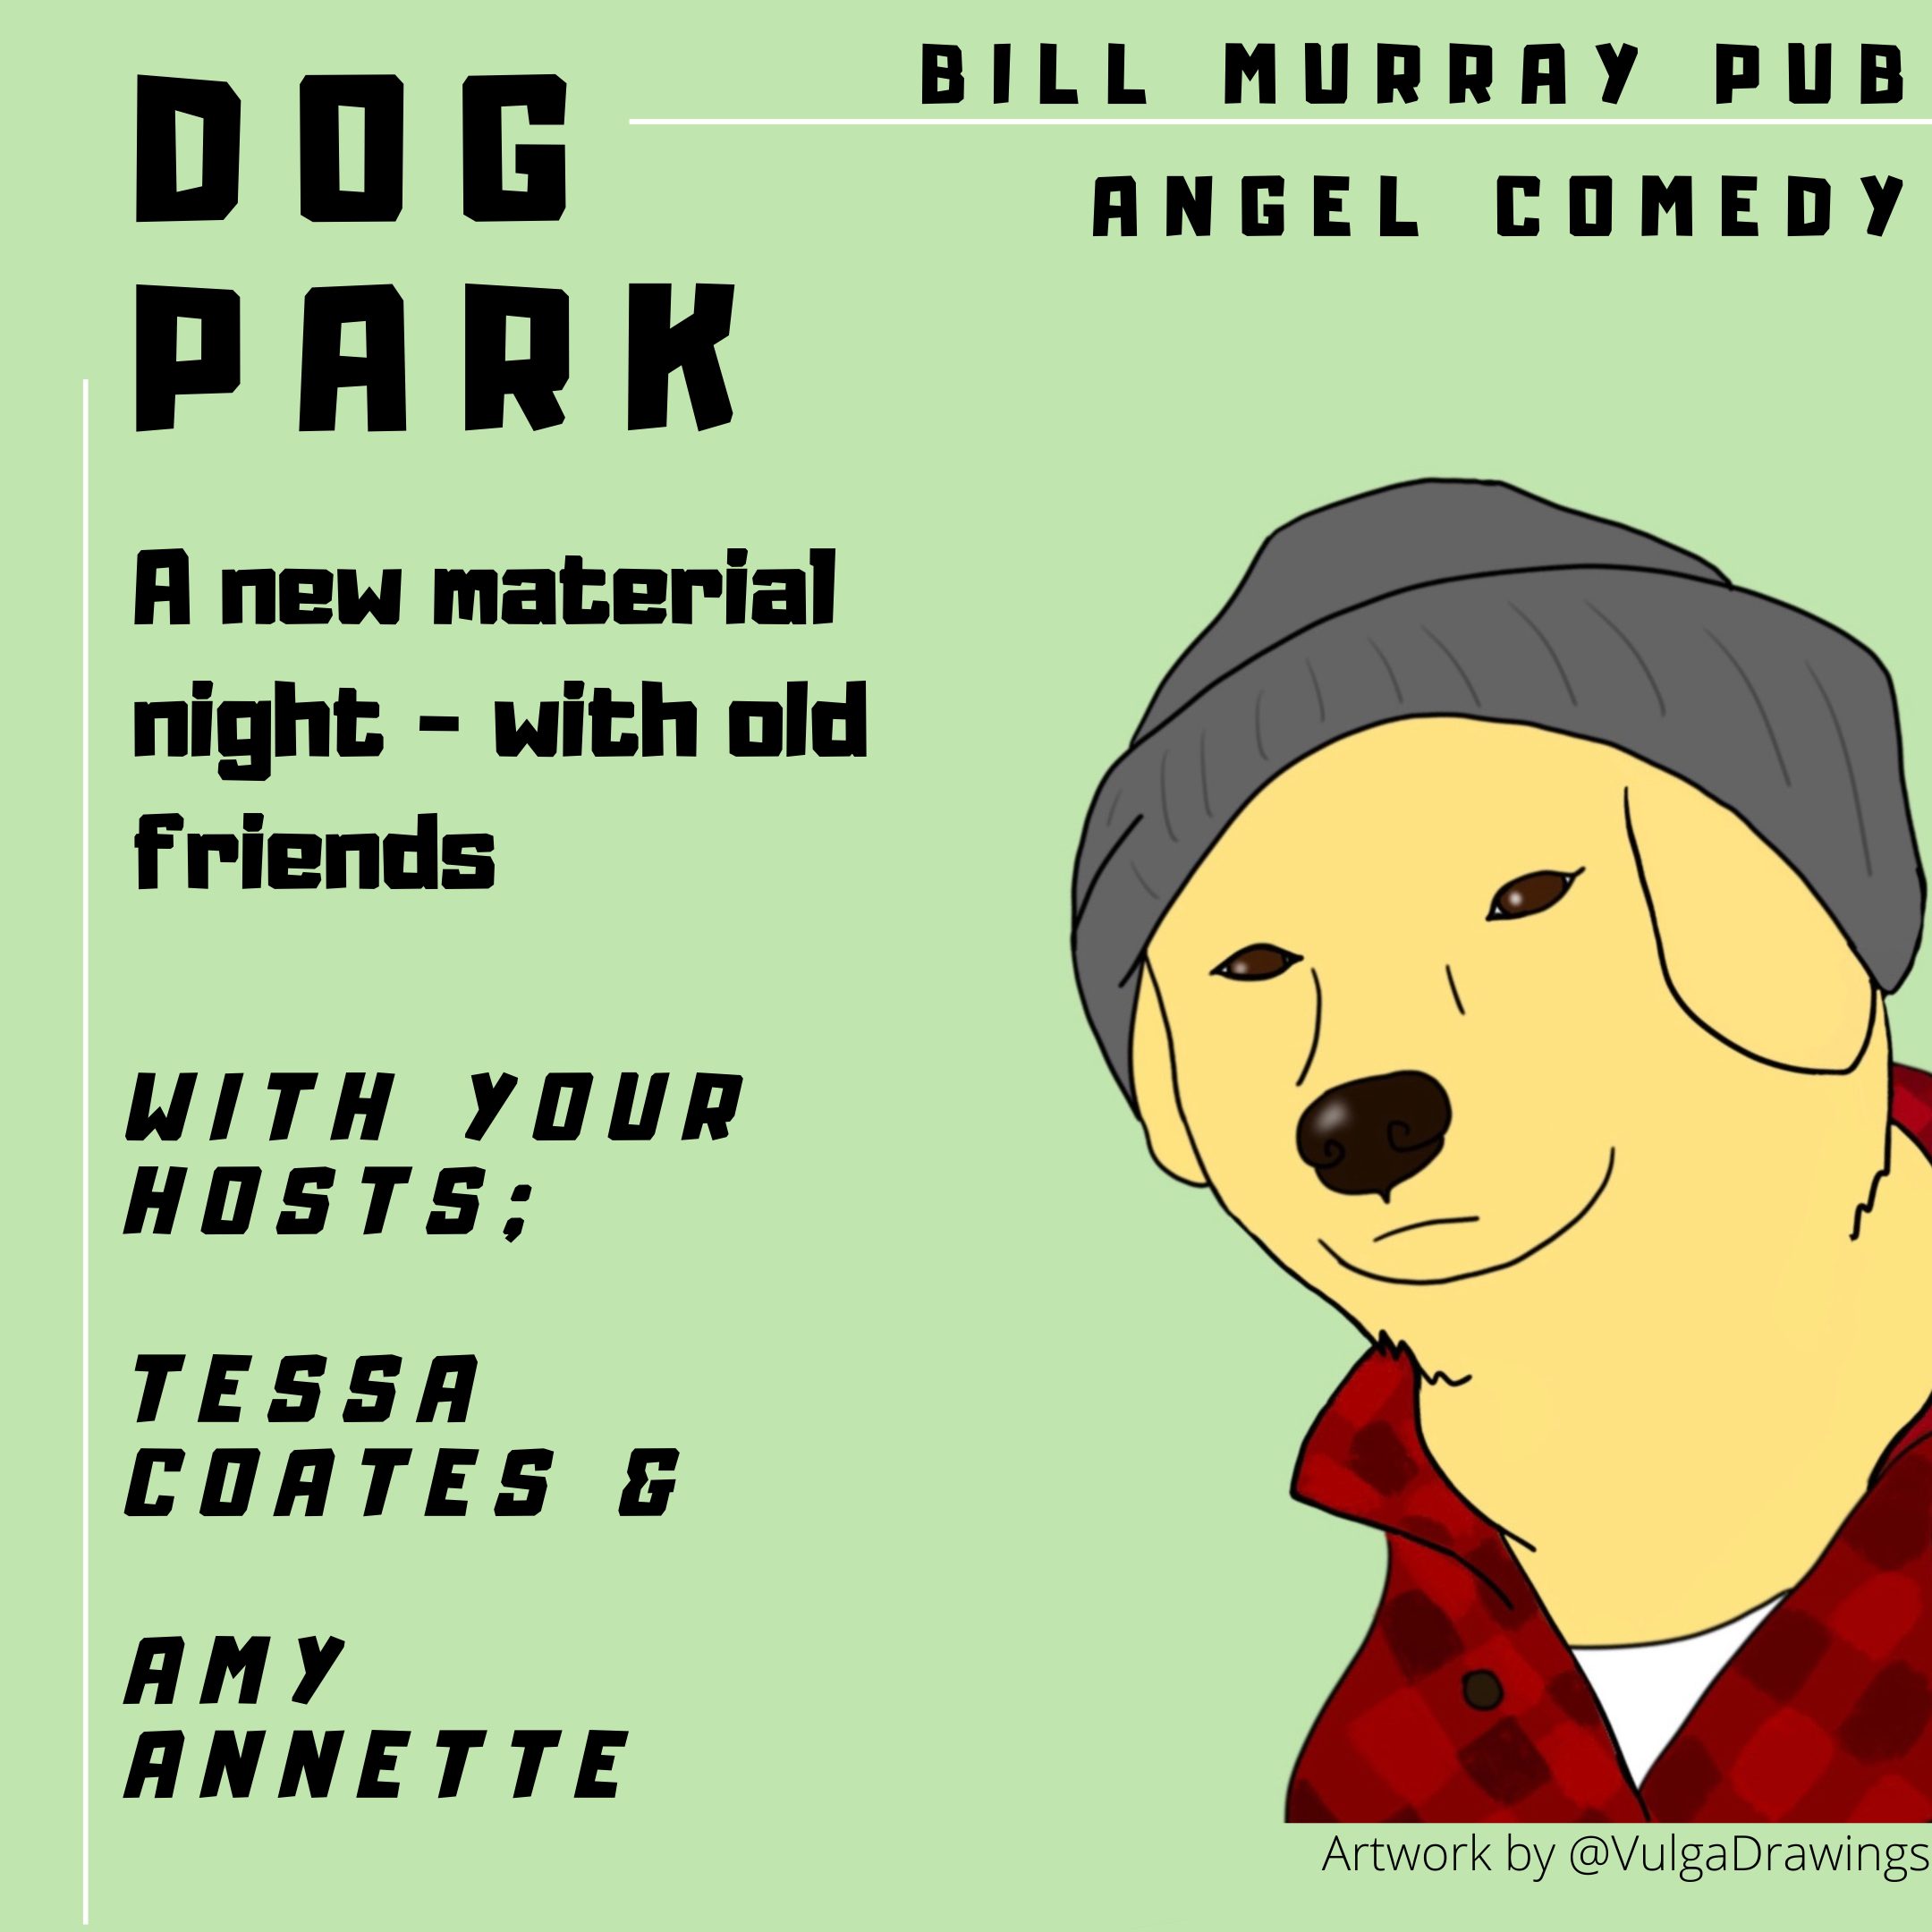 DOGPARK at The Bill Murray - Angel Comedy Club